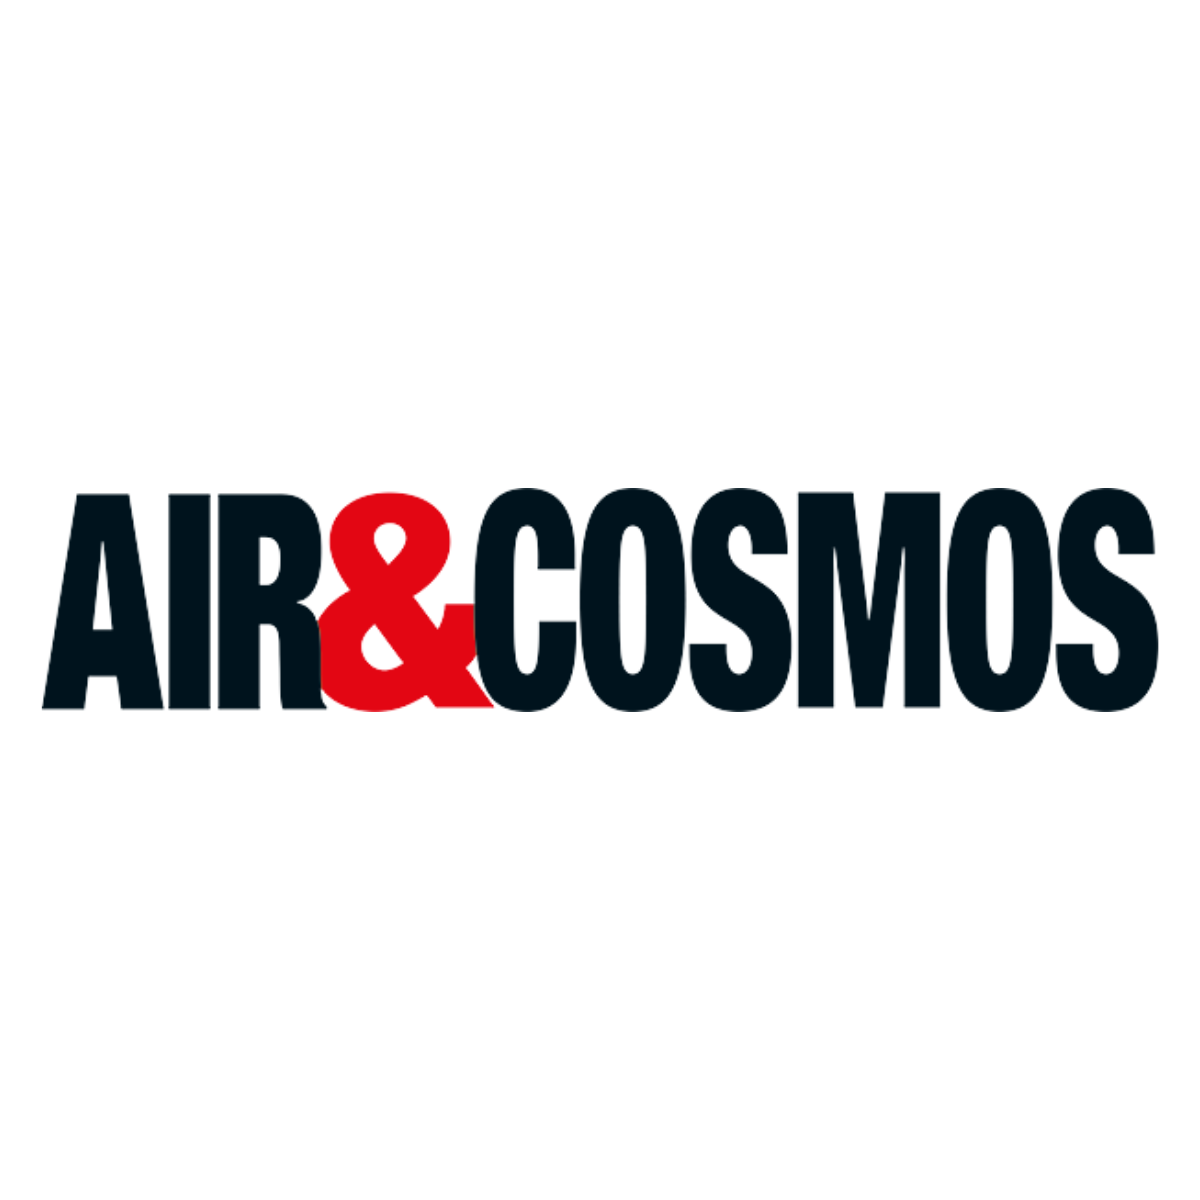 Following the announcement of obtaining EASA approval at the Farnborough Airshow, Air&Cosmos shares a podcast about CorsoPatch Aircraft